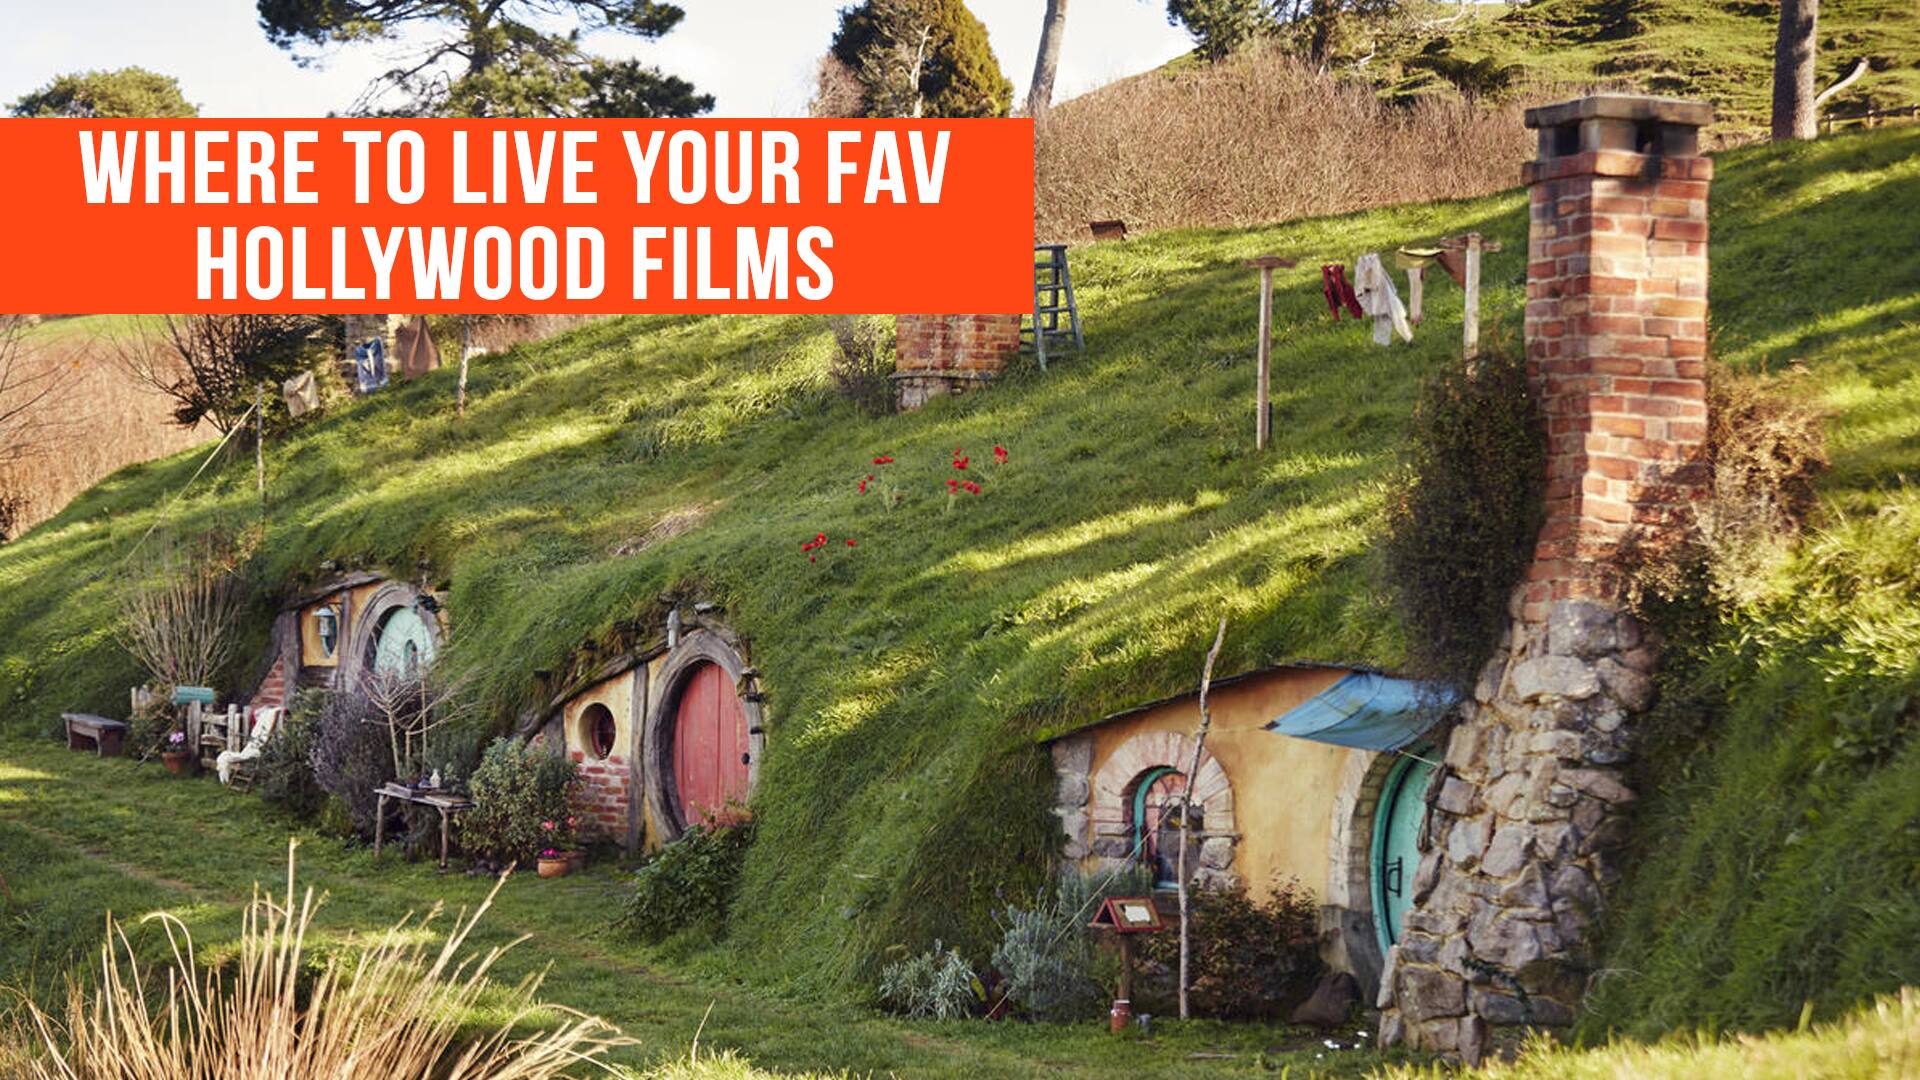 Relive your fav Hollywood films here